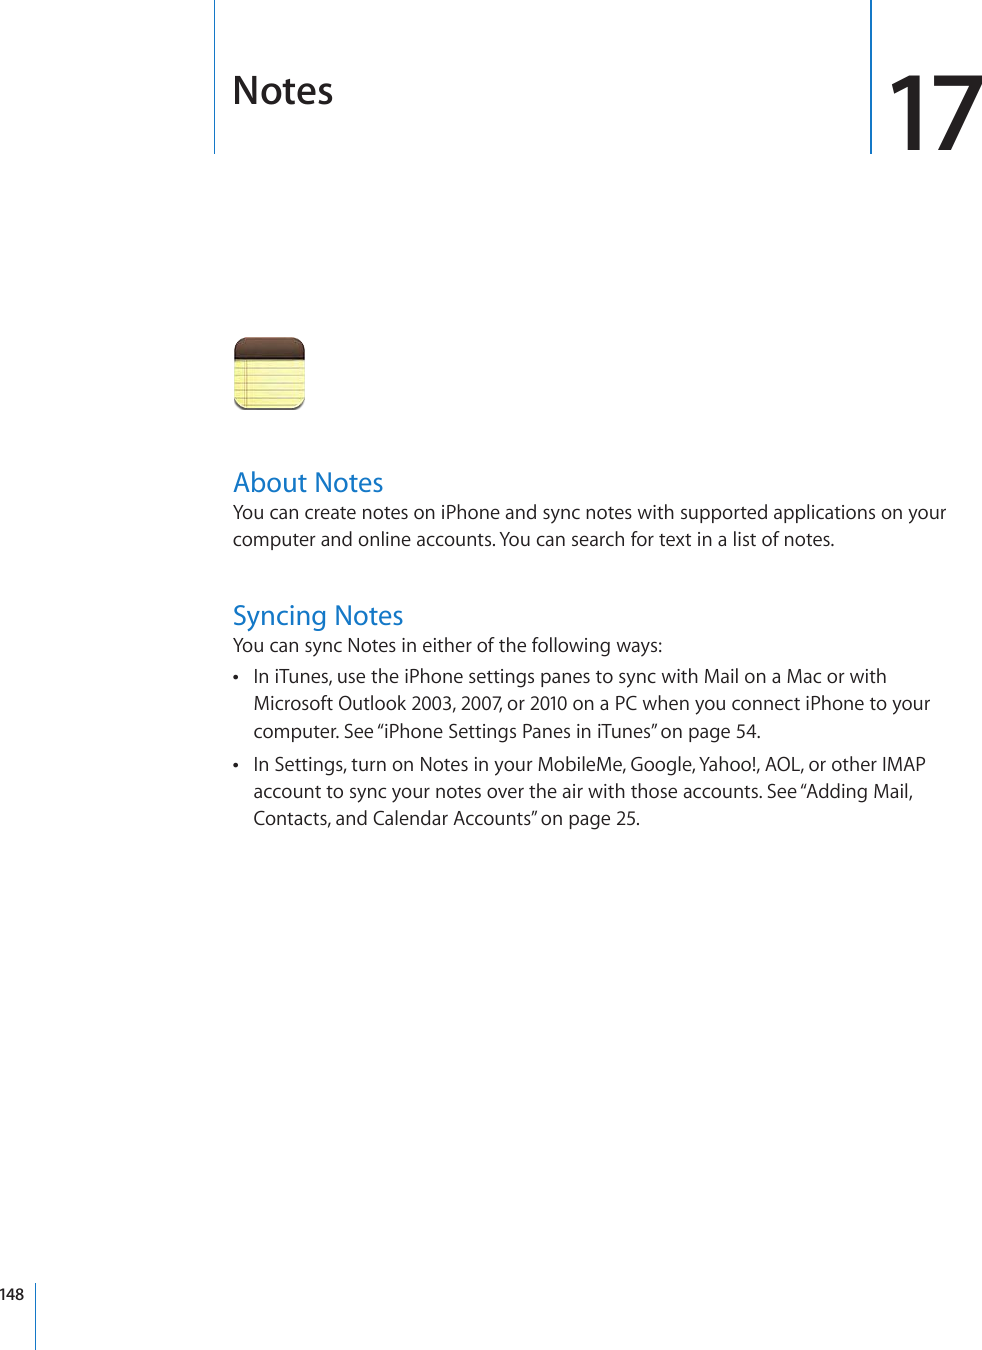 Notes 17About NotesYou can create notes on iPhone and sync notes with supported applications on your computer and online accounts. You can search for text in a list of notes.Syncing NotesYou can sync Notes in either of the following ways:In iTunes, use the iPhone settings panes to sync with Mail on a Mac or with  Microsoft Outlook 2003, 2007, or 2010 on a PC when you connect iPhone to your computer. See “iPhone Settings Panes in iTunes” on page 54.In Settings, turn on Notes in your MobileMe, Google, Yahoo!, AOL, or other IMAP  account to sync your notes over the air with those accounts. See “Adding Mail, Contacts, and Calendar Accounts” on page 25.148